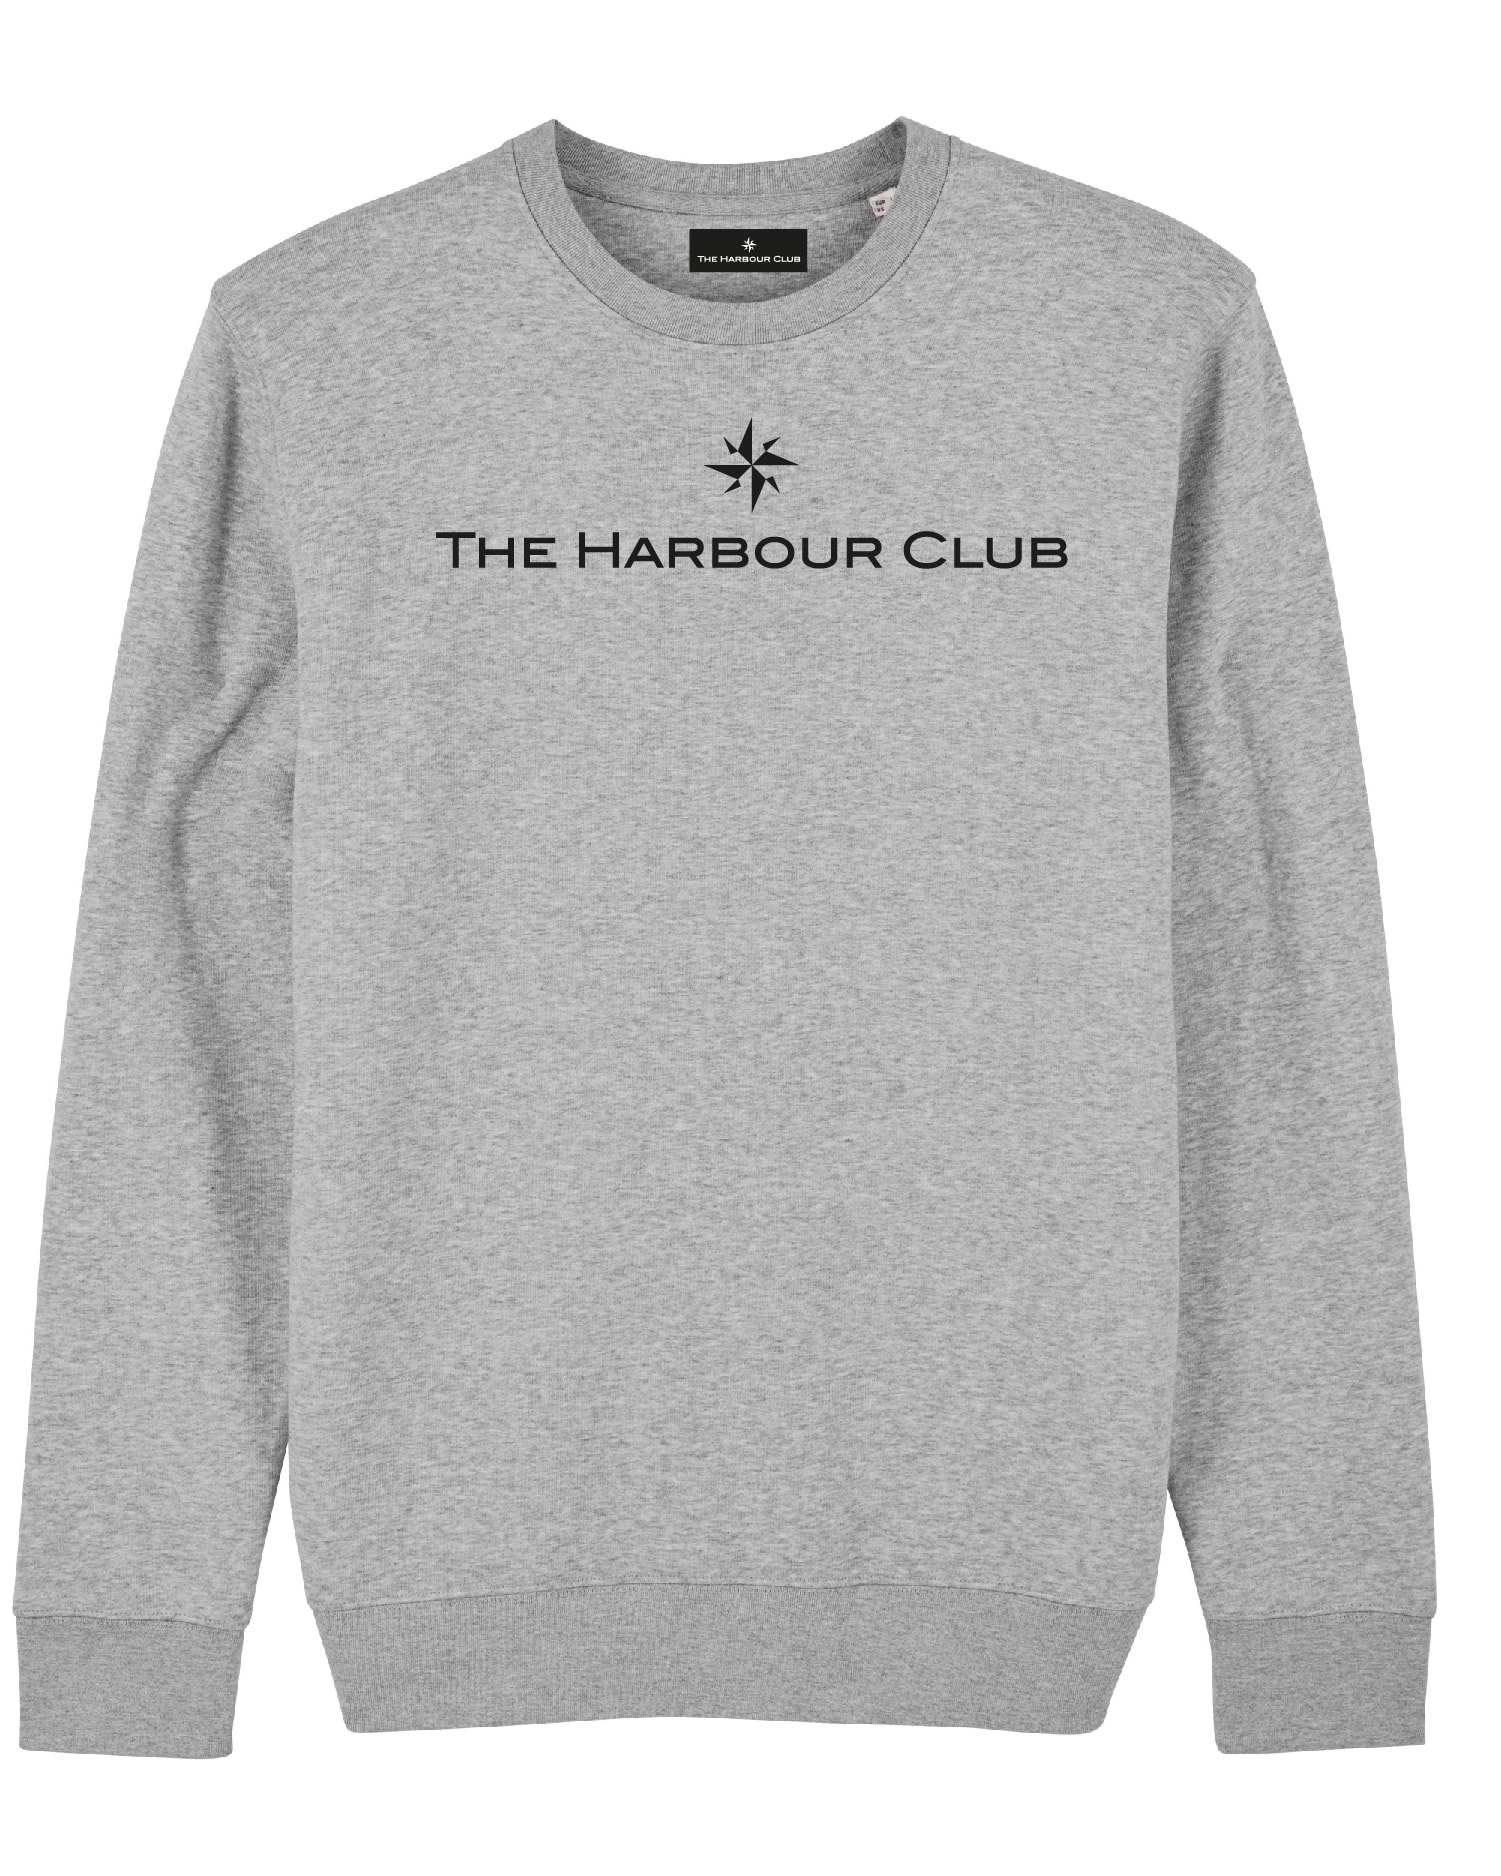 The Harbour Club Giftcard